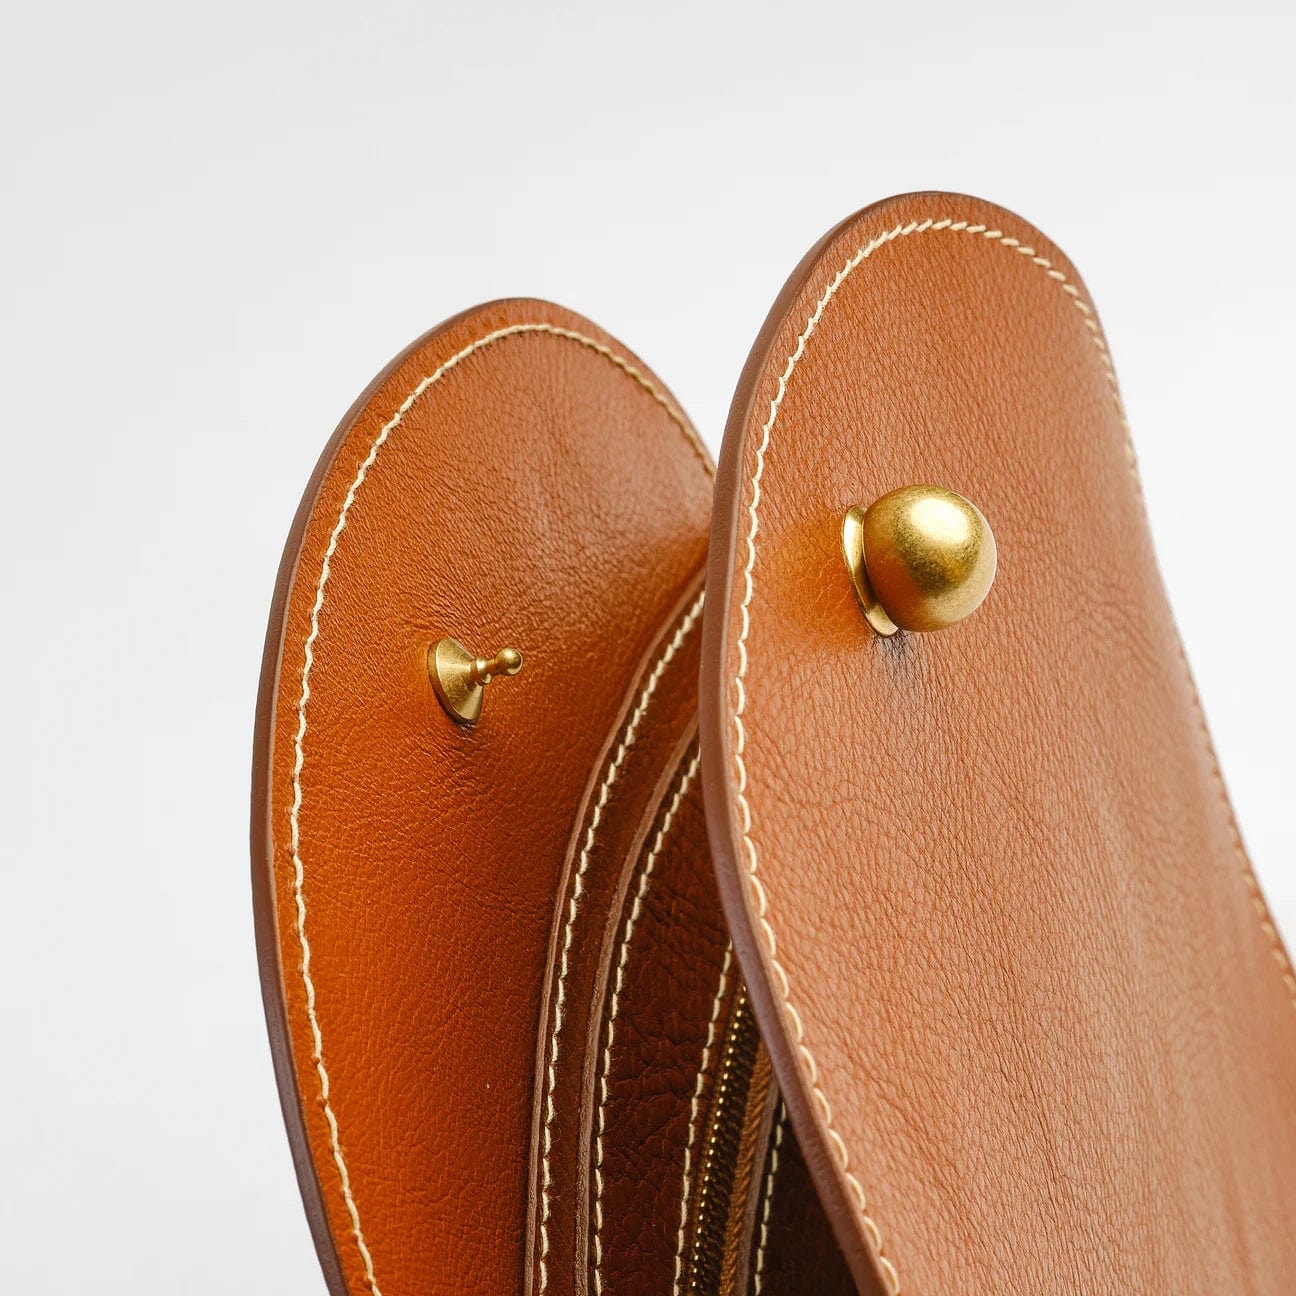 The Eggi in Leather Brown Bags Lindquist   